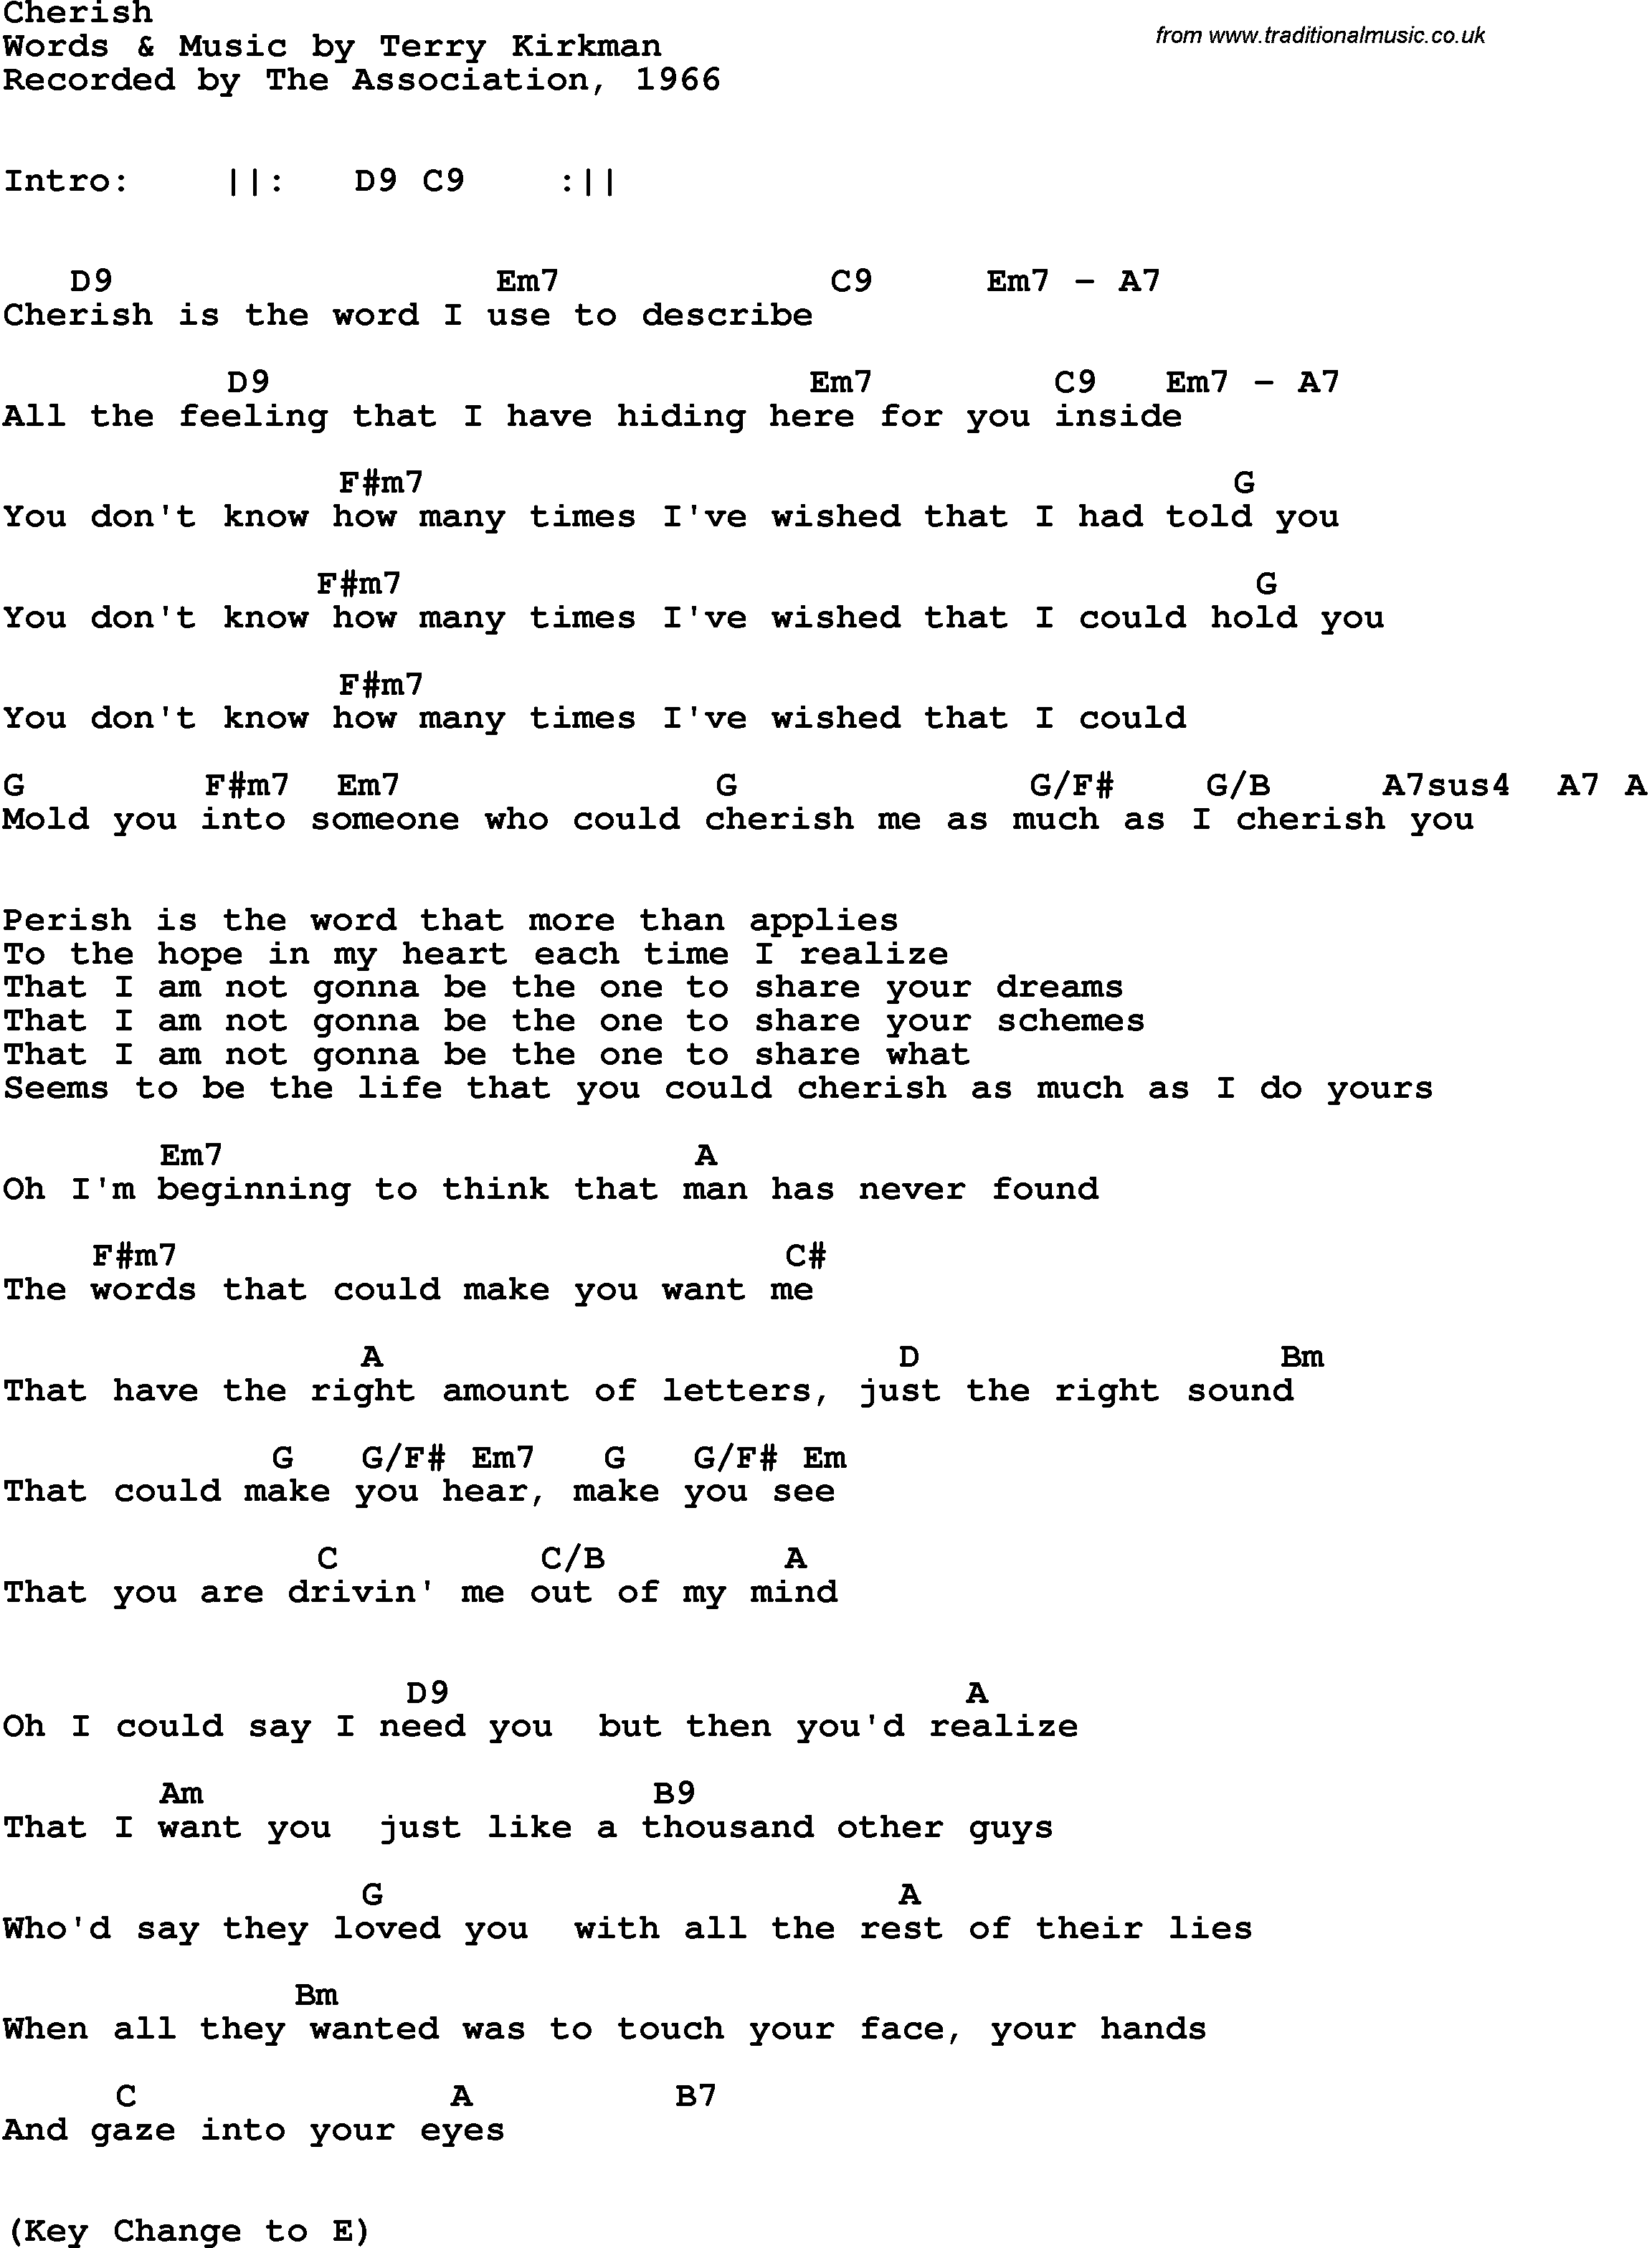 Song Lyrics with guitar chords for Cherish - The Association, 1966